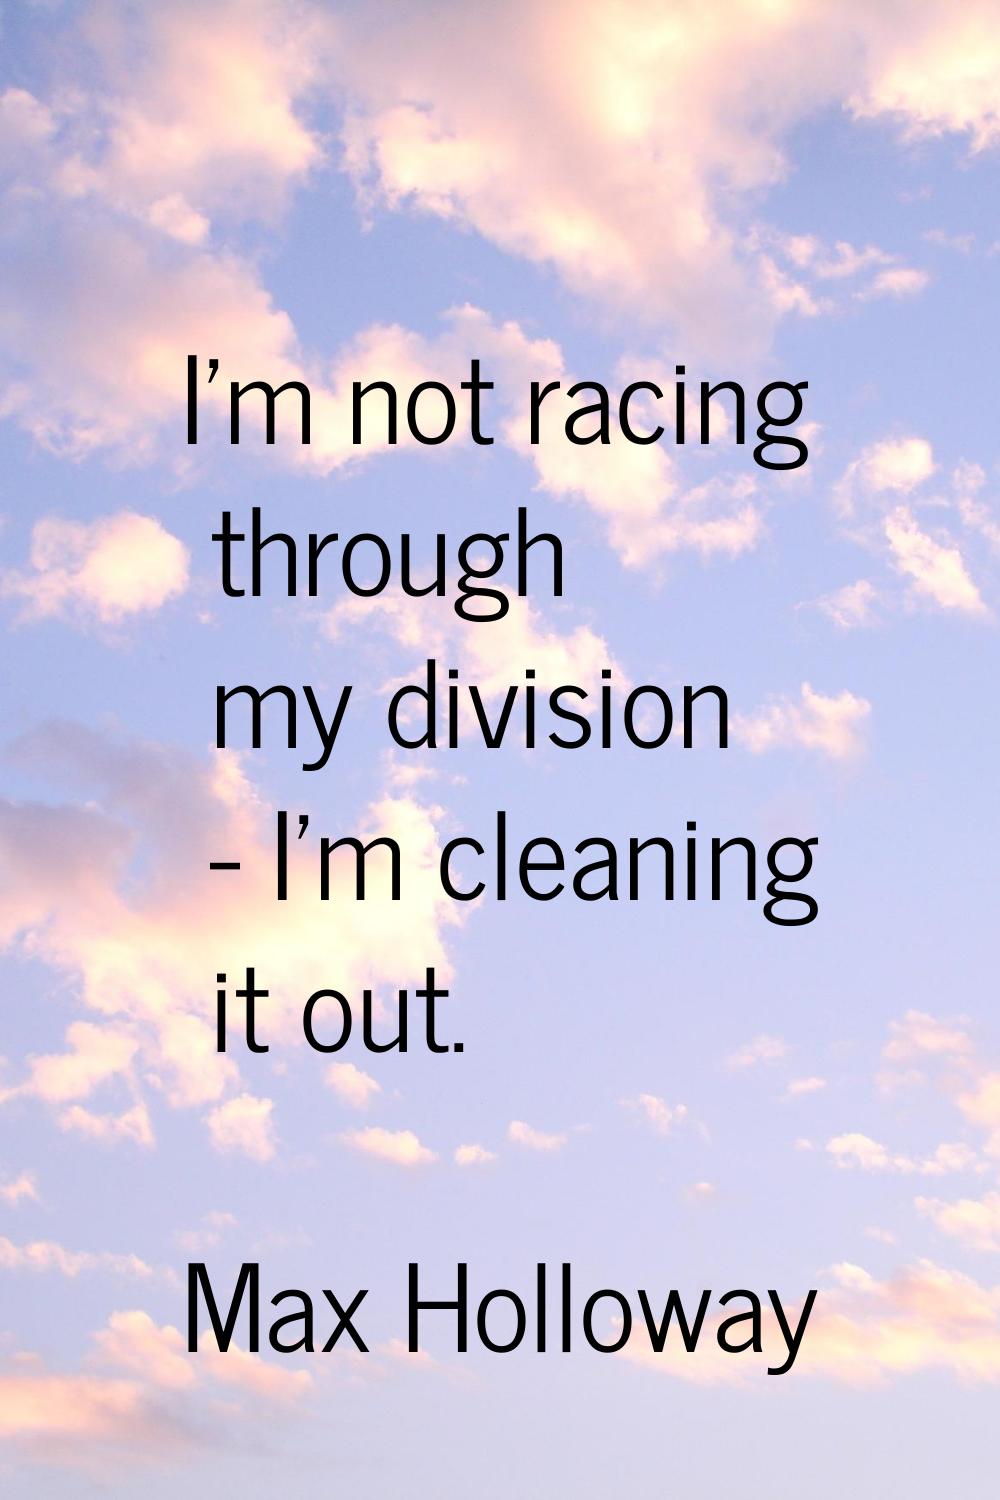 I'm not racing through my division - I'm cleaning it out.